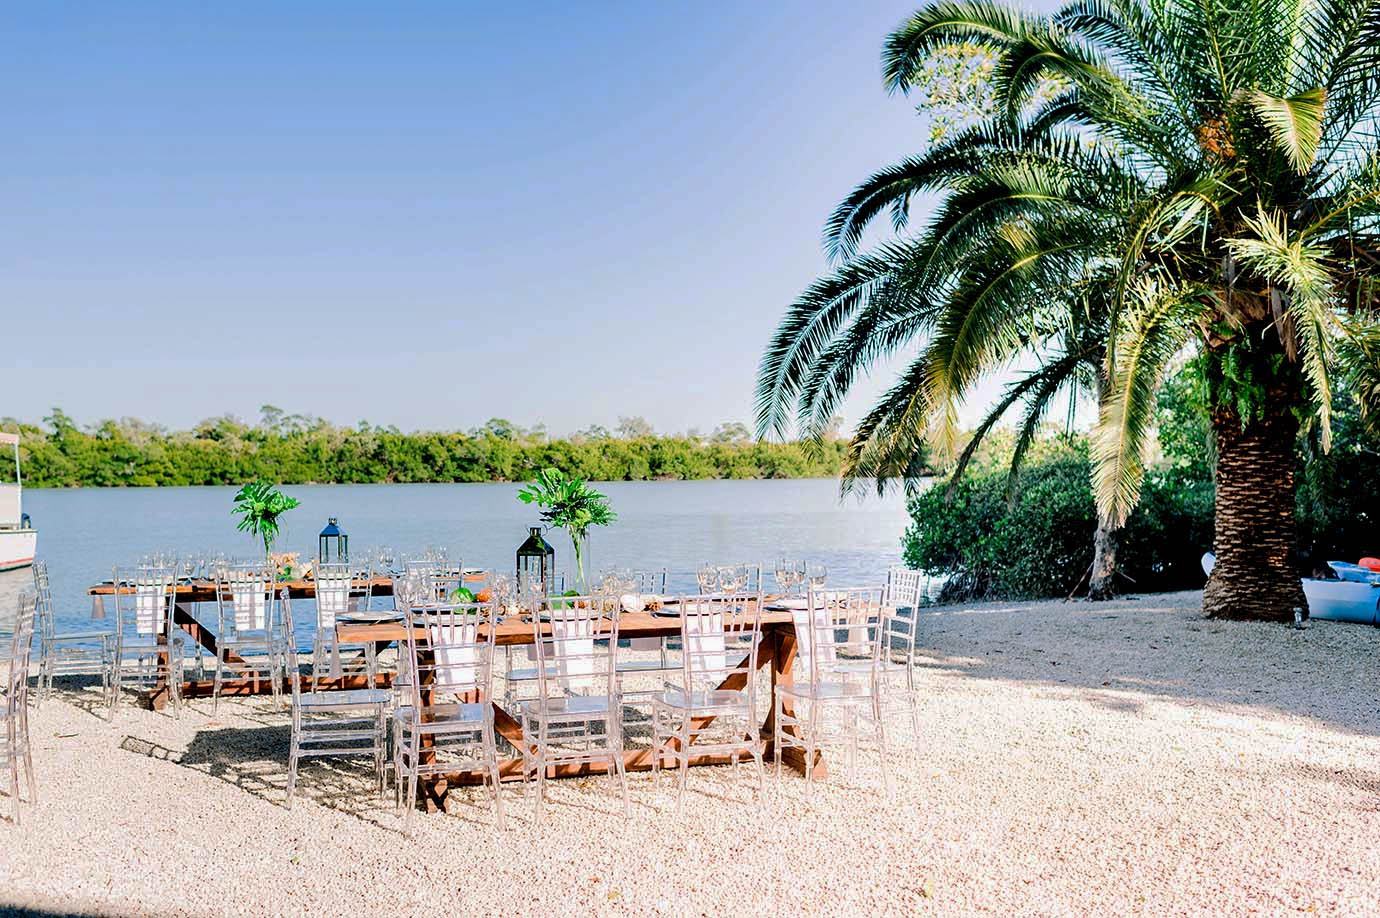 Tables and Chairs on beach overlooking the ocean near boat and palm trees at the Sea Oats Estate in Captiva Island, FL